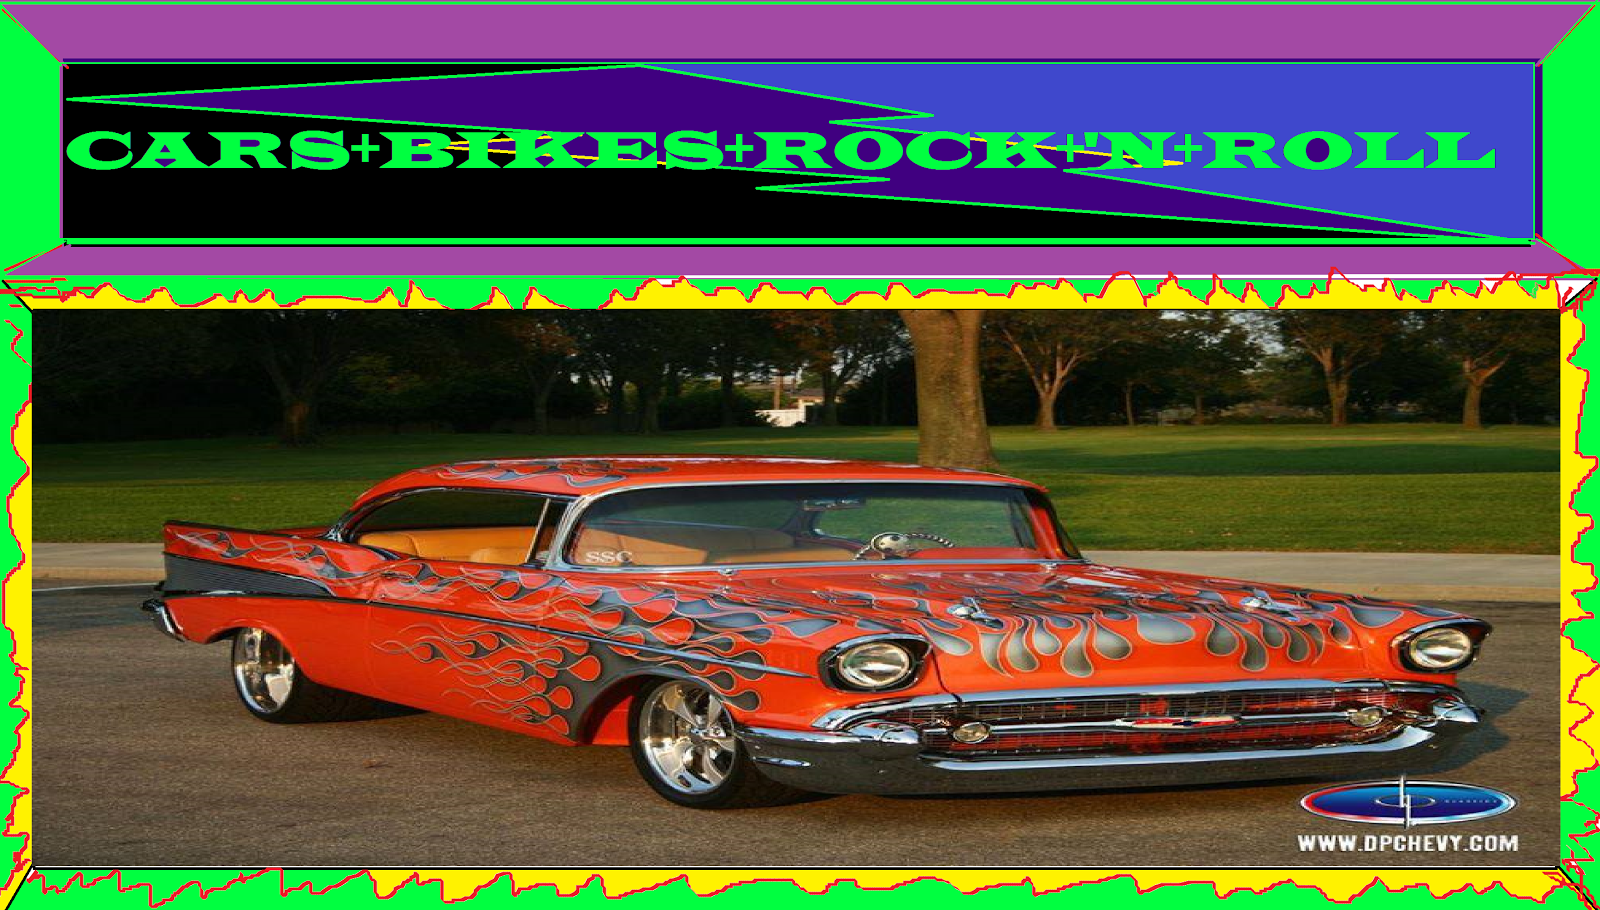 '57 CHEVY BY CARS+BIKES+ROCK+'N+ROLL+YouTube Playlist.